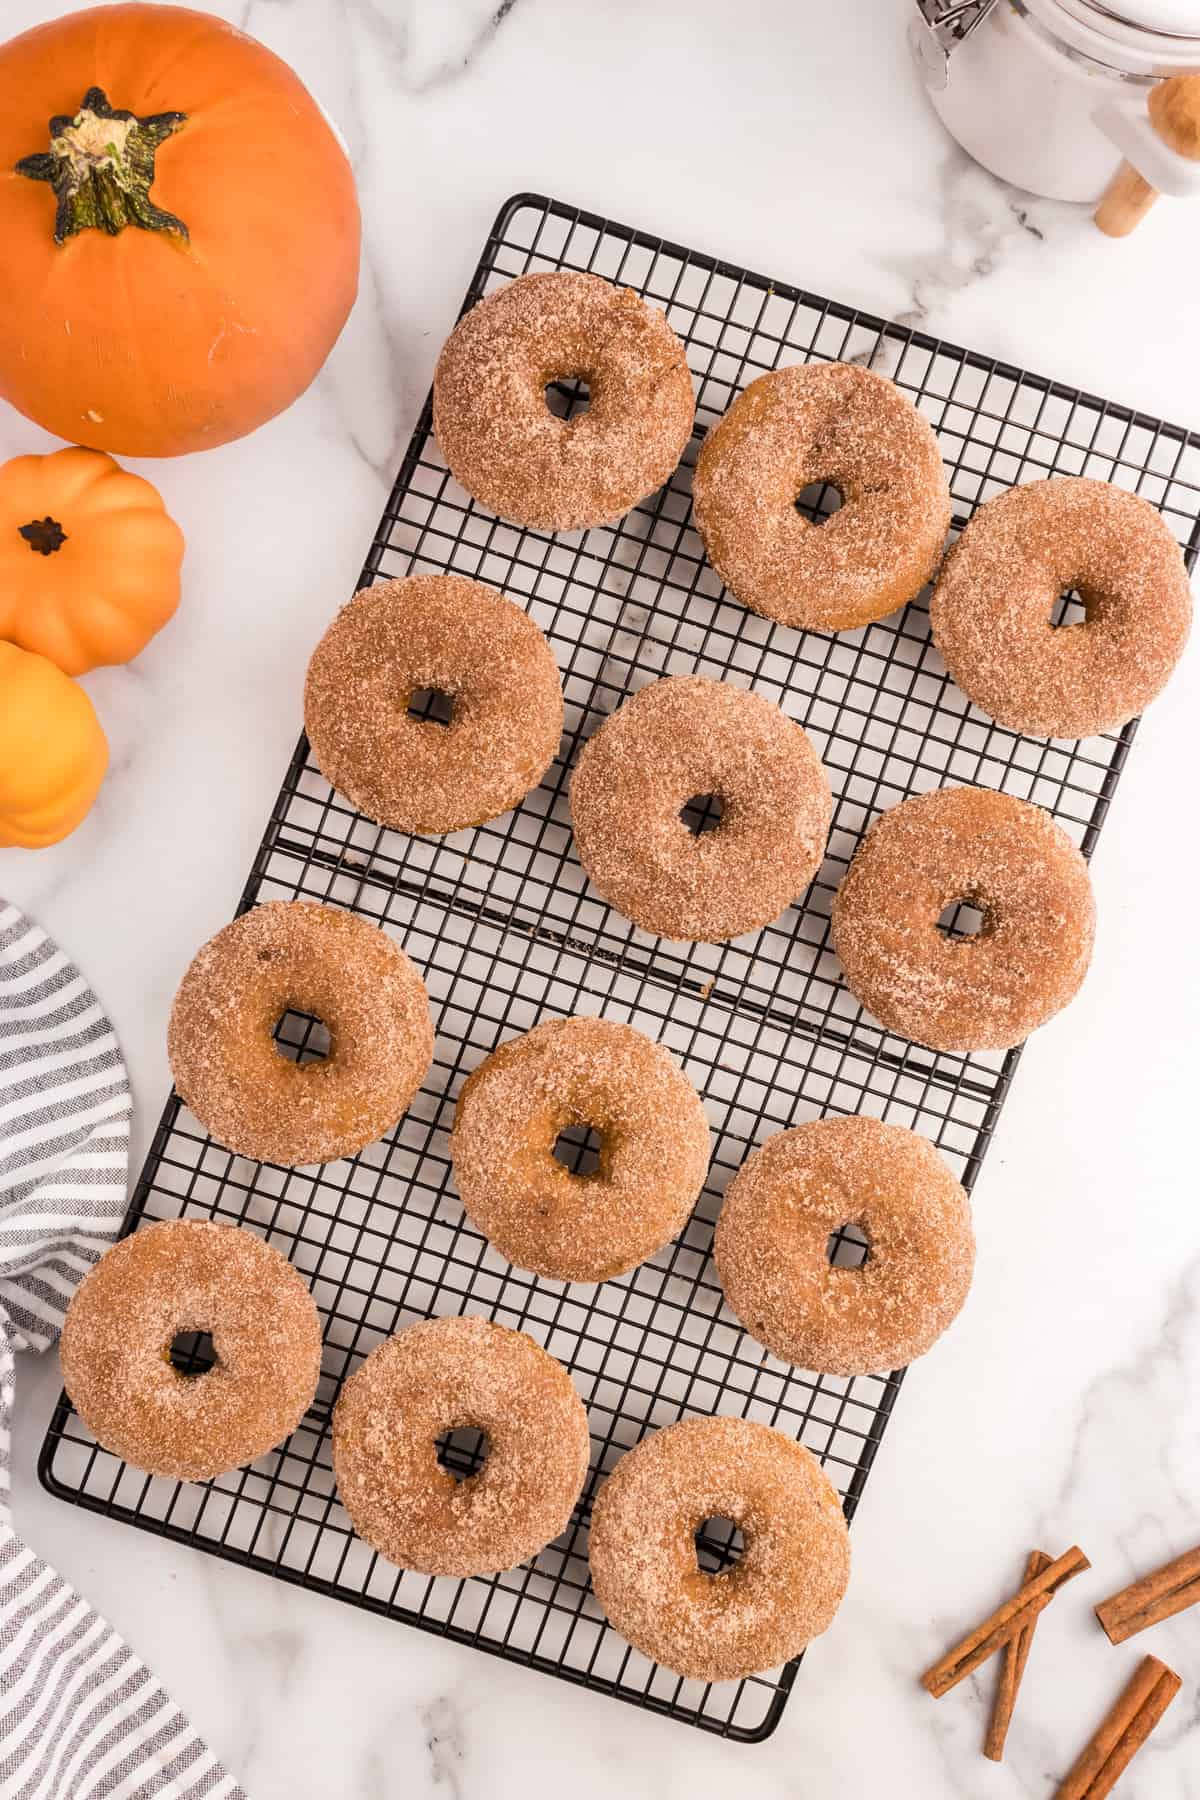 Pumpkin Donuts coated with cinnamon and sugar on cooling rack